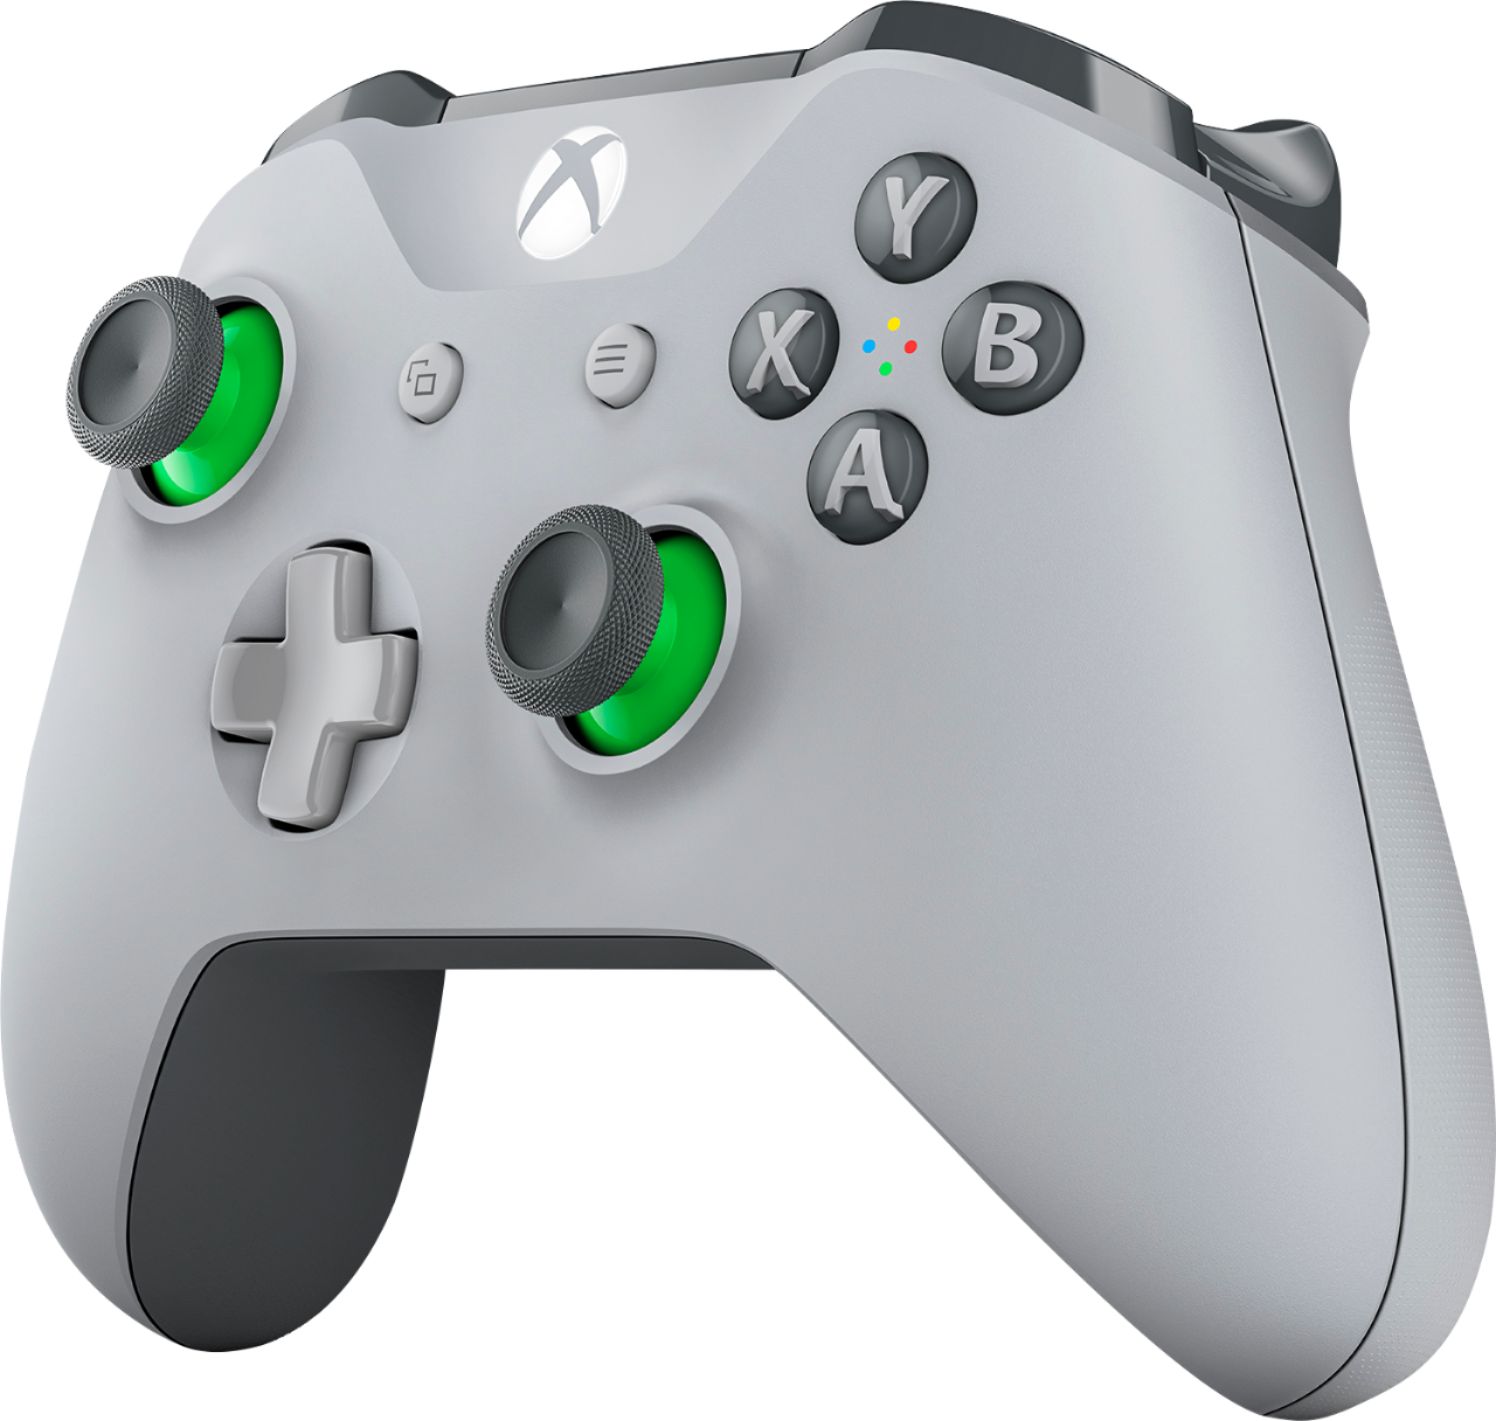 Customer Reviews Microsoft Wireless Controller For Xbox One Xbox